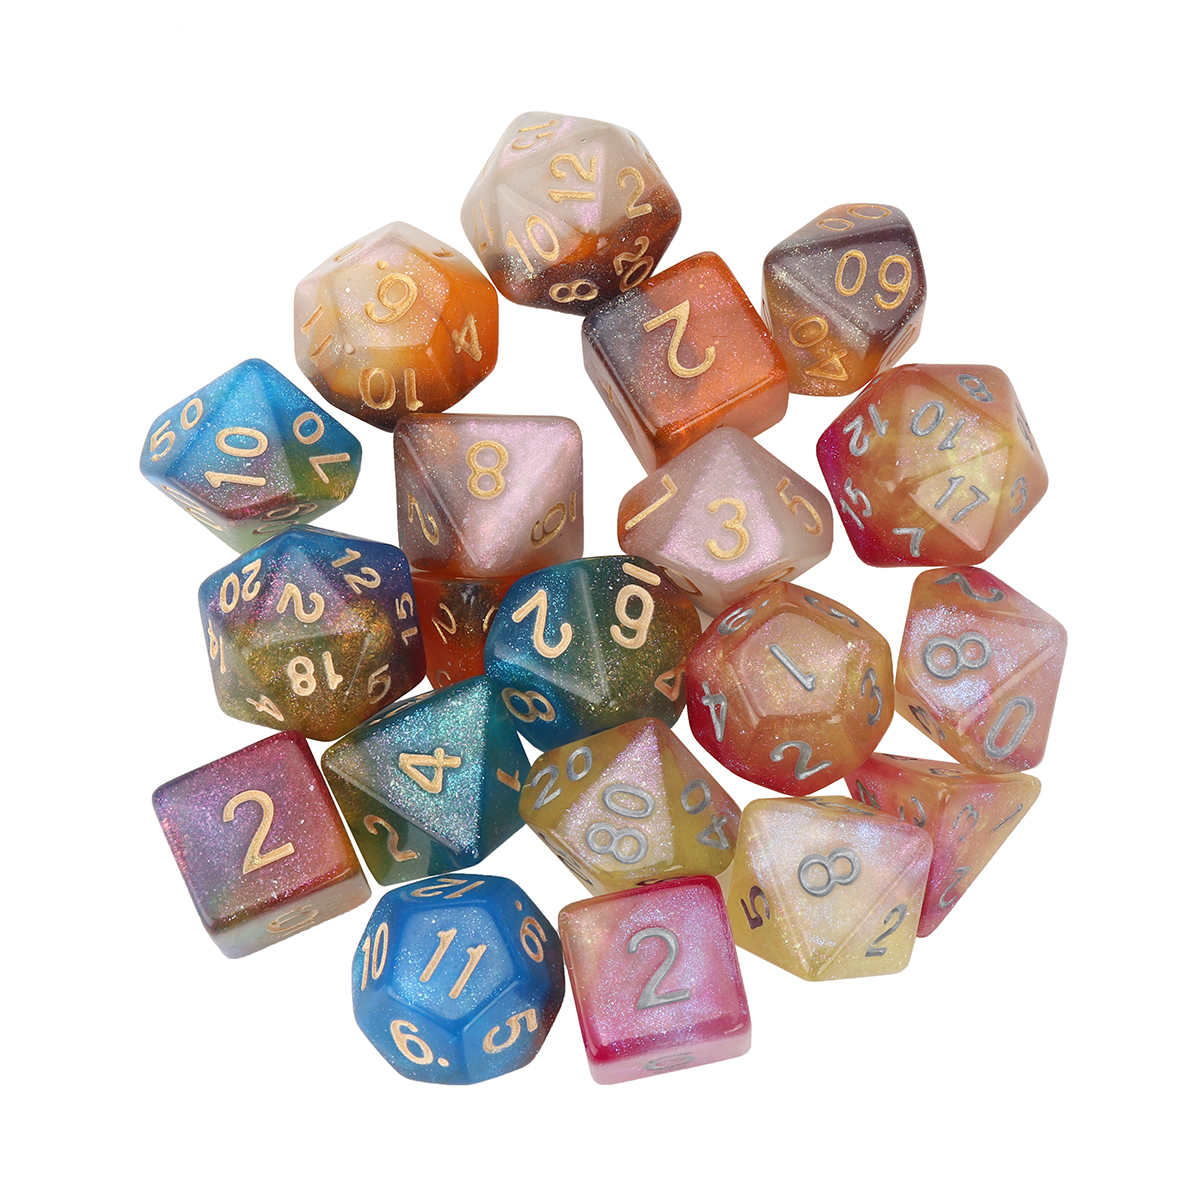 7Pcs-Polyhedral-Dice-Set-Board-Game-Multisided-Dices-Gadget-Acrylic-Polyhedral-Dices-Role-Playing-Ga-1700348-3